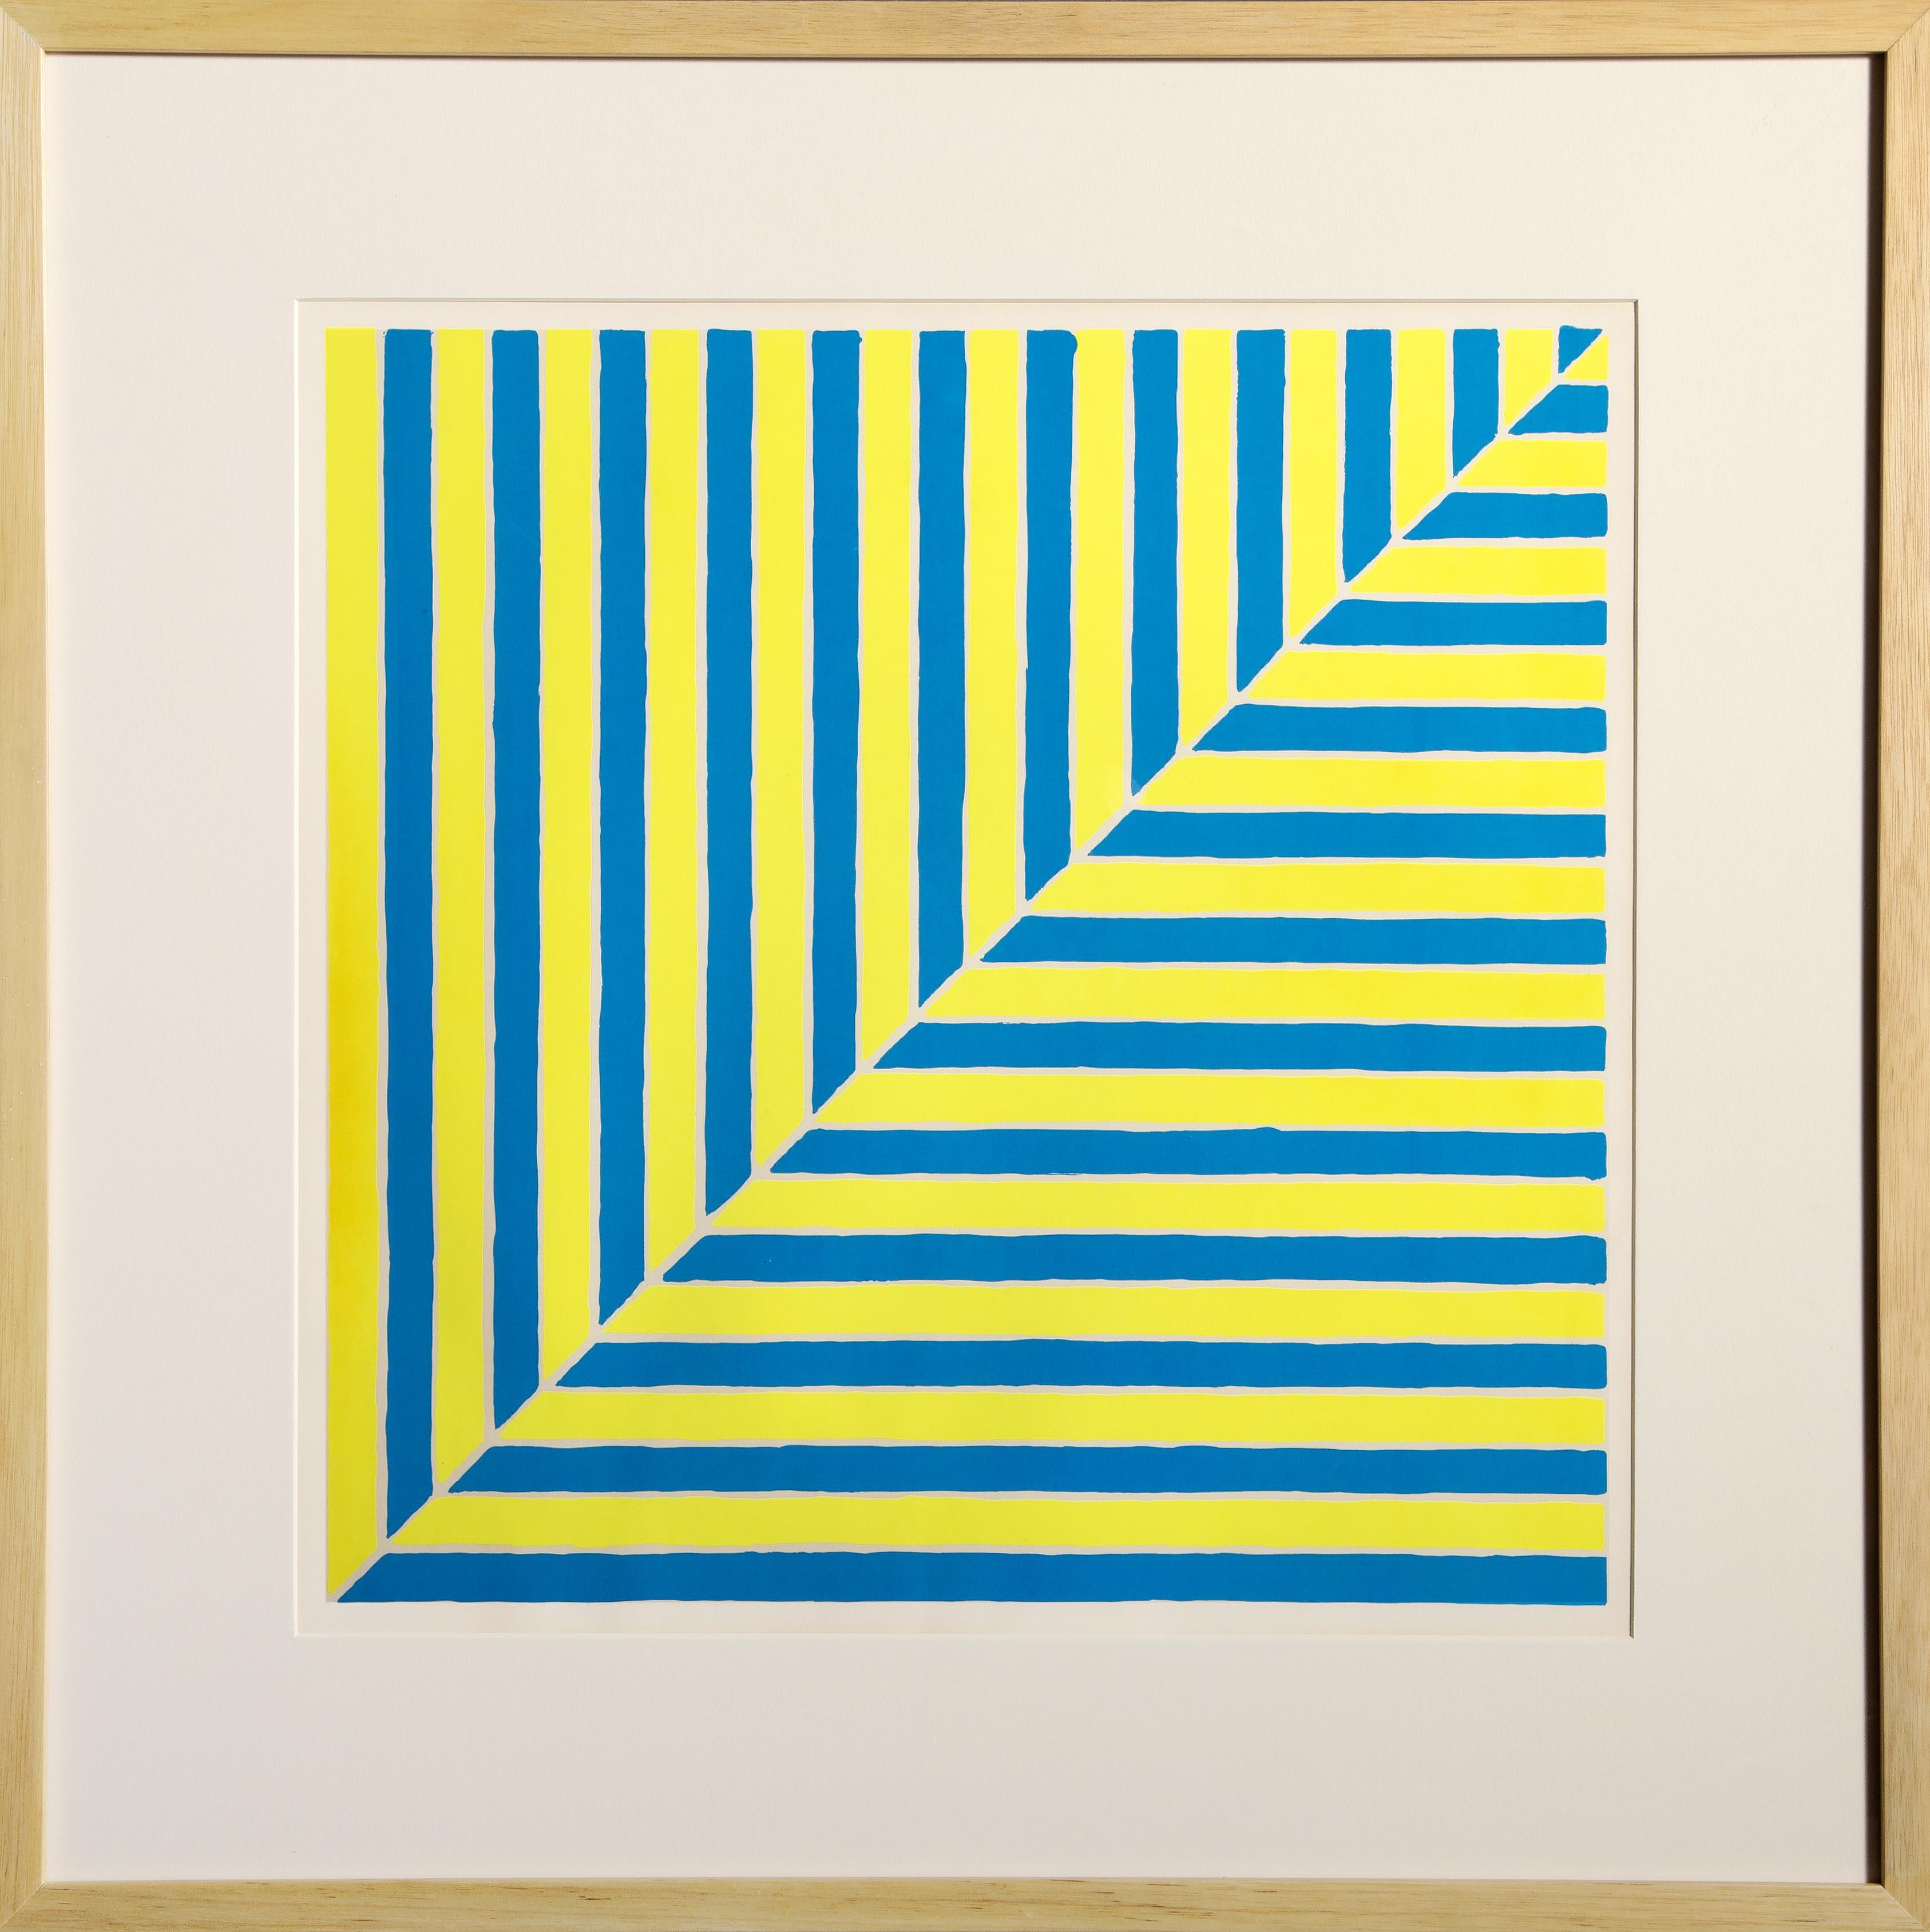 An original screenprint by Frank Stella from X + X (Ten Works by Ten Painters) published in 1964 by Wadsworth Atheneum, CT. The print was printed by Ives-Sillman, CT and referenced in the Axsom Catalogue Raisonne as Appen. 1A. Edition size: 500.